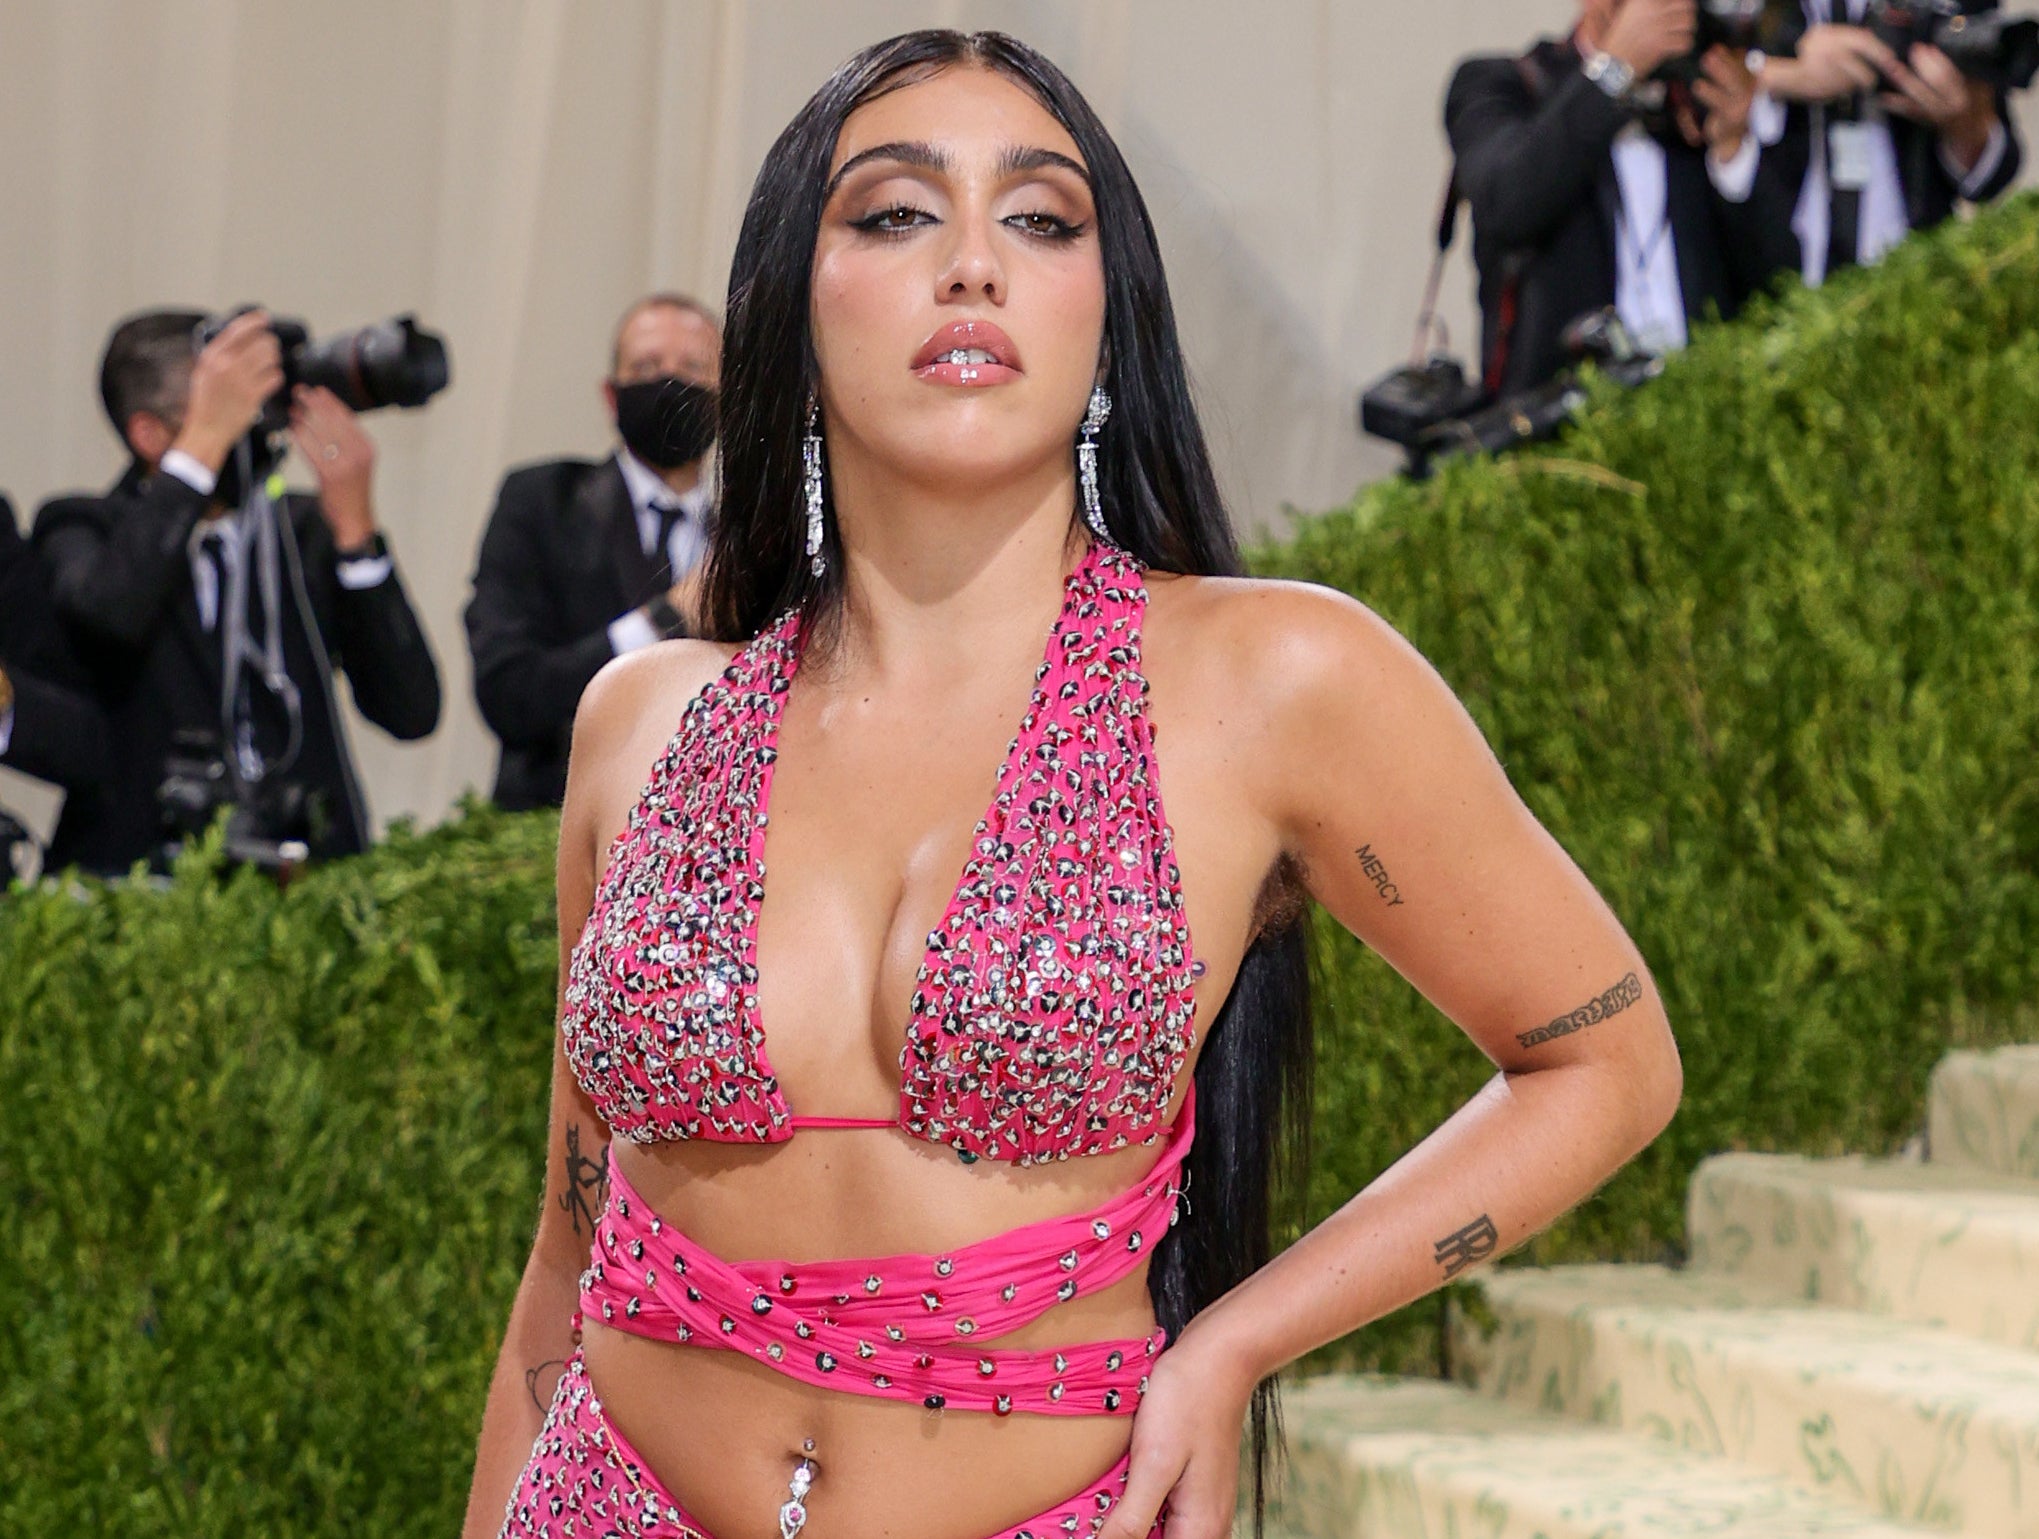 Lourdes attends the Met Gala recently